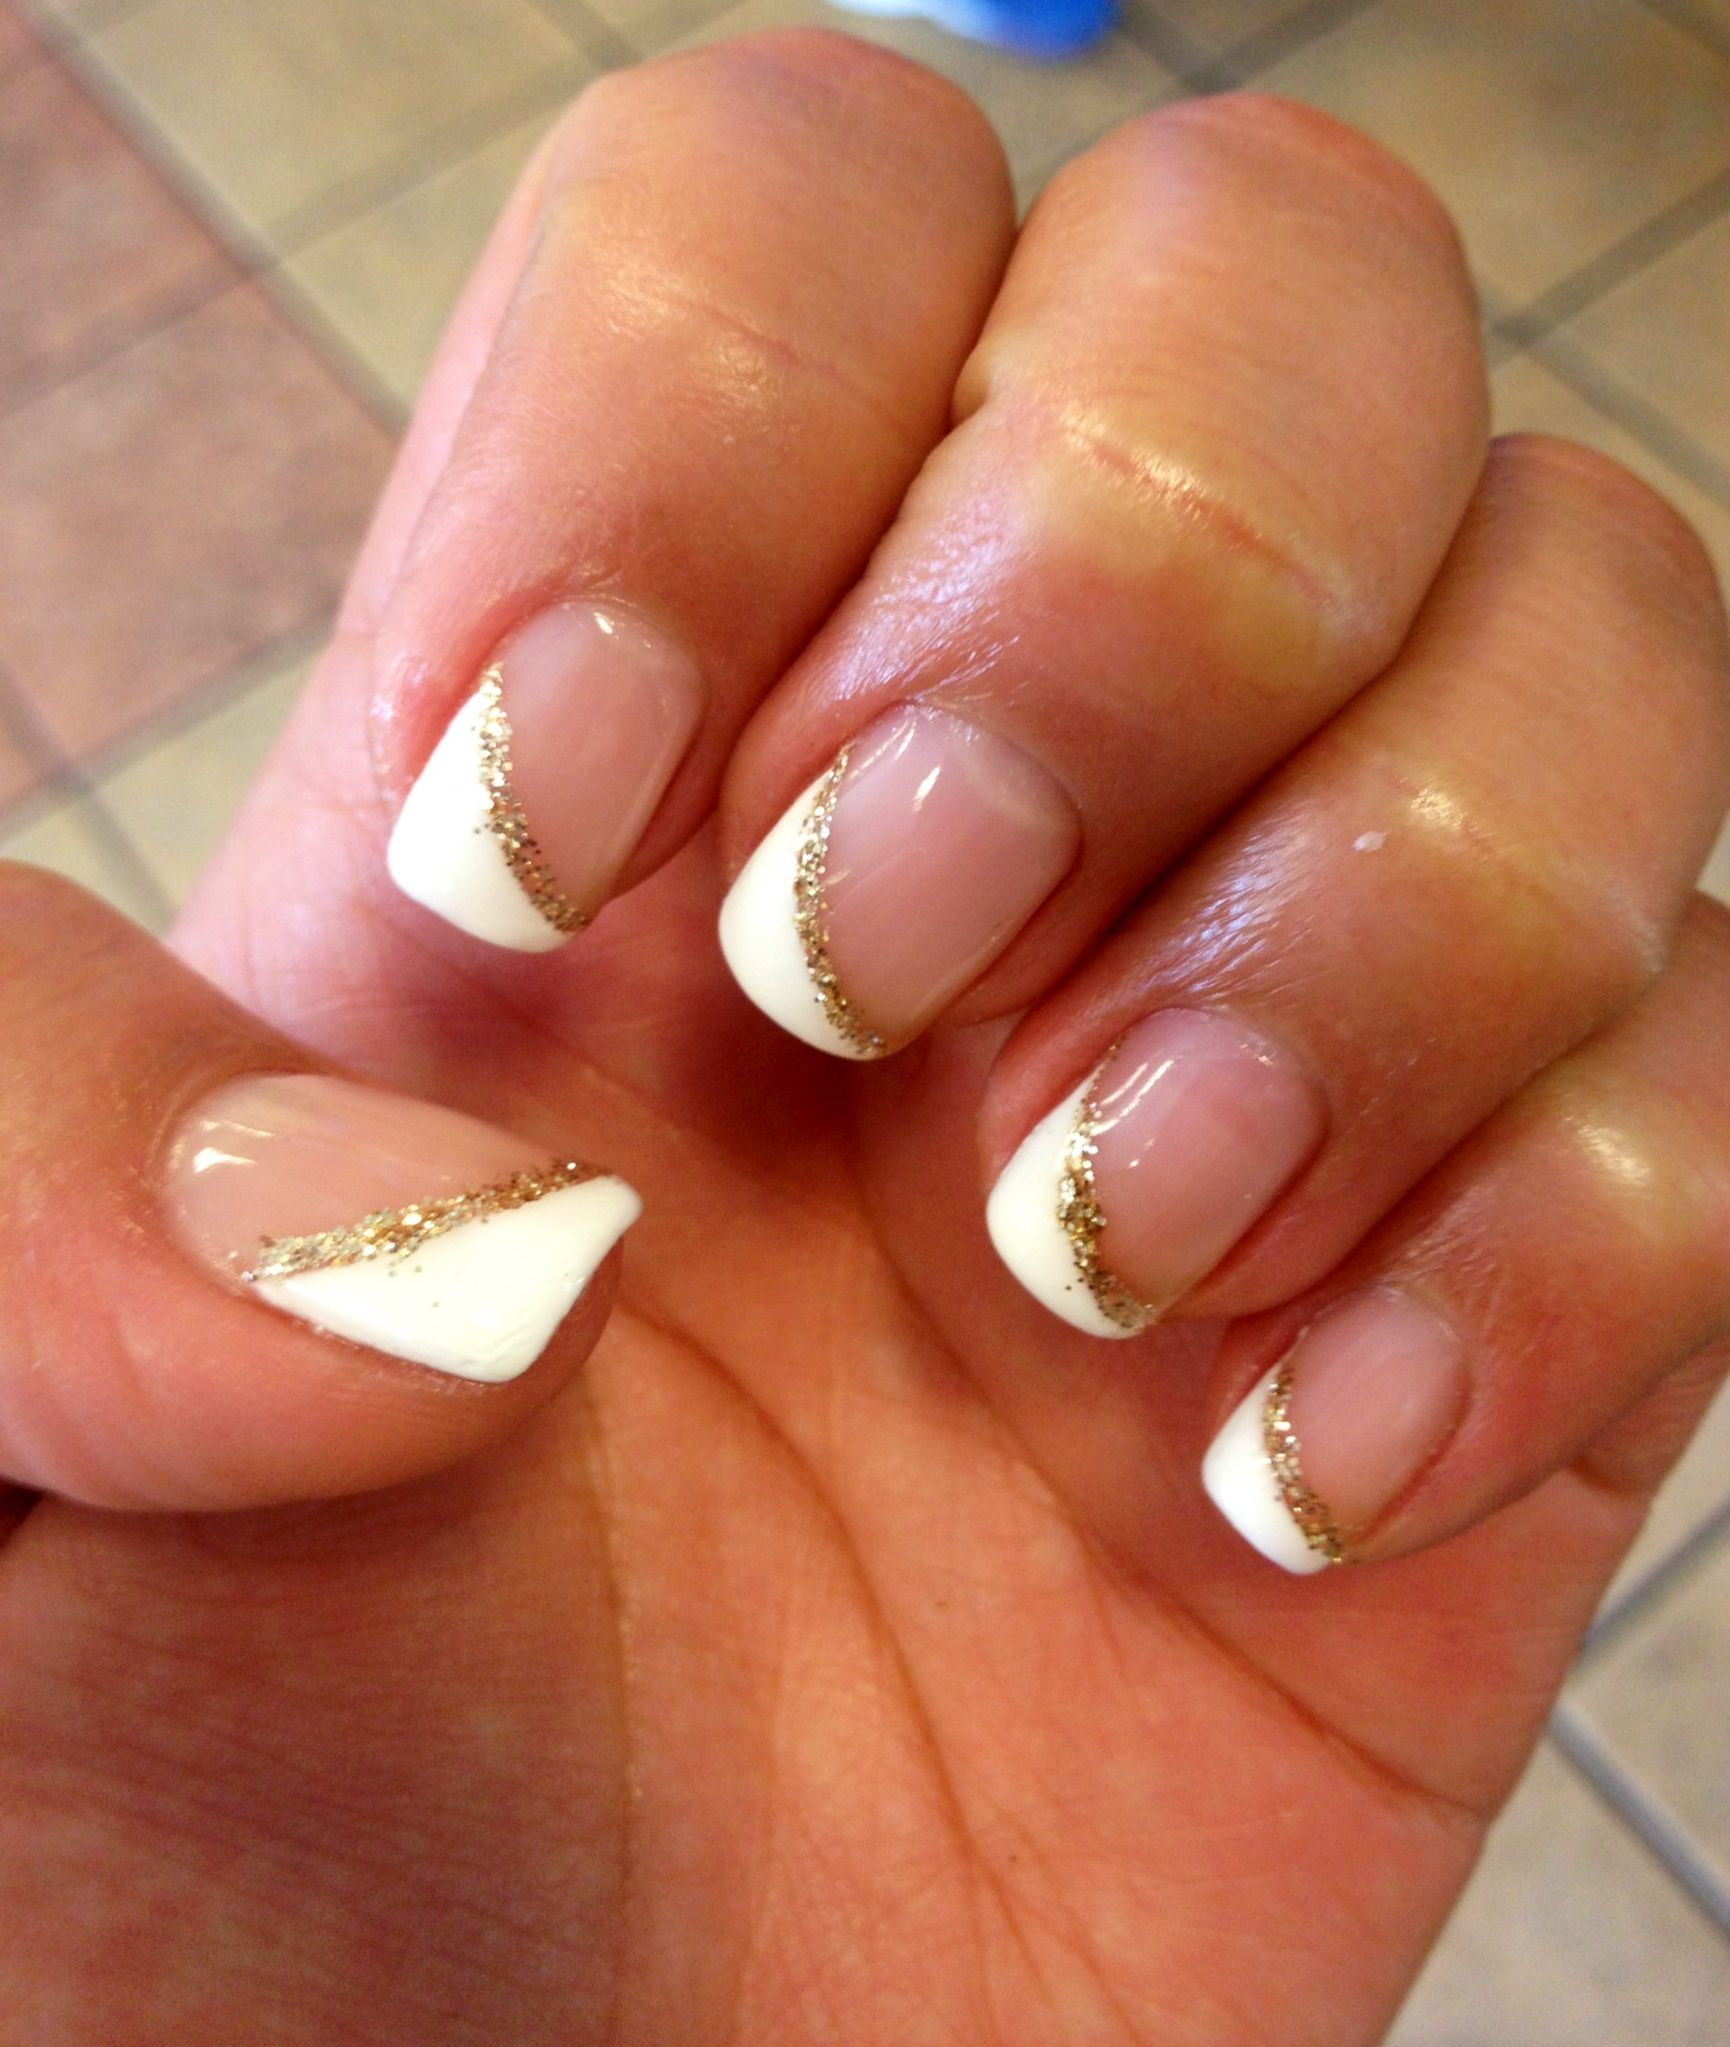 Wedding French Nails
 My beautiful angled french tip Wedding Nails